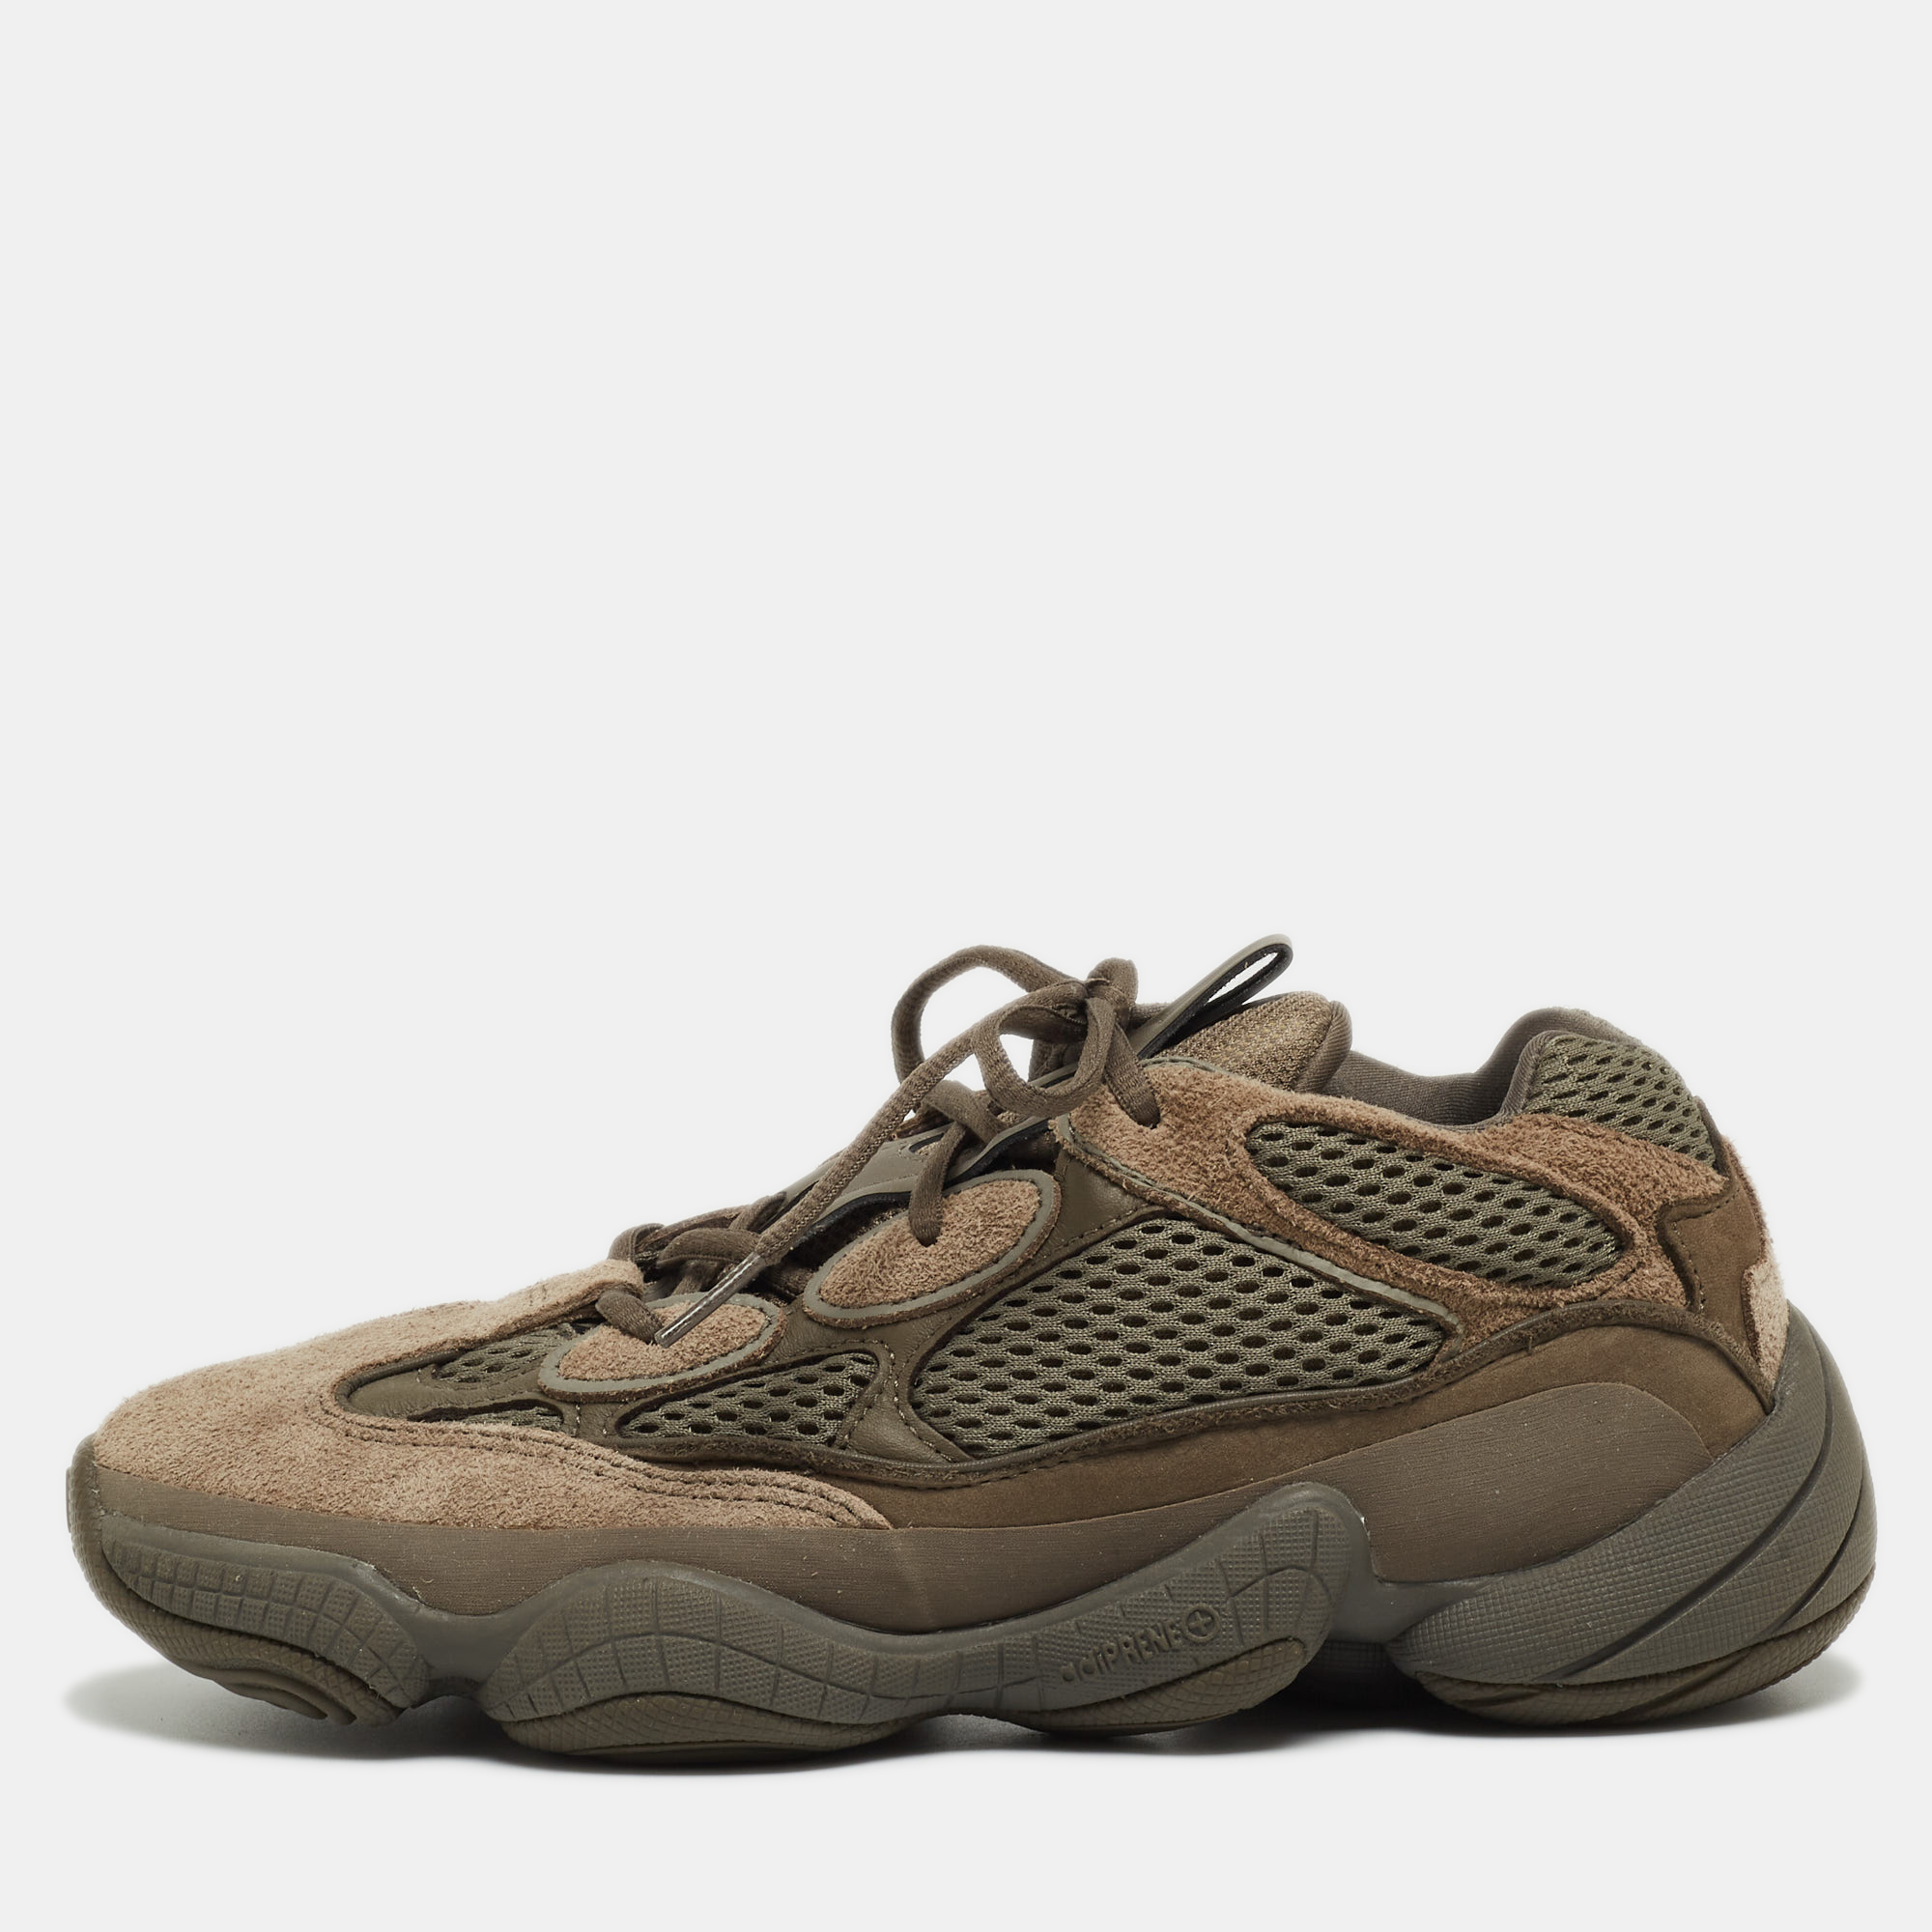 Yeezy X Adidas Two Tone Mesh And Suede Yeezy 500 Clay Brown Sneakers Size 41 1/3